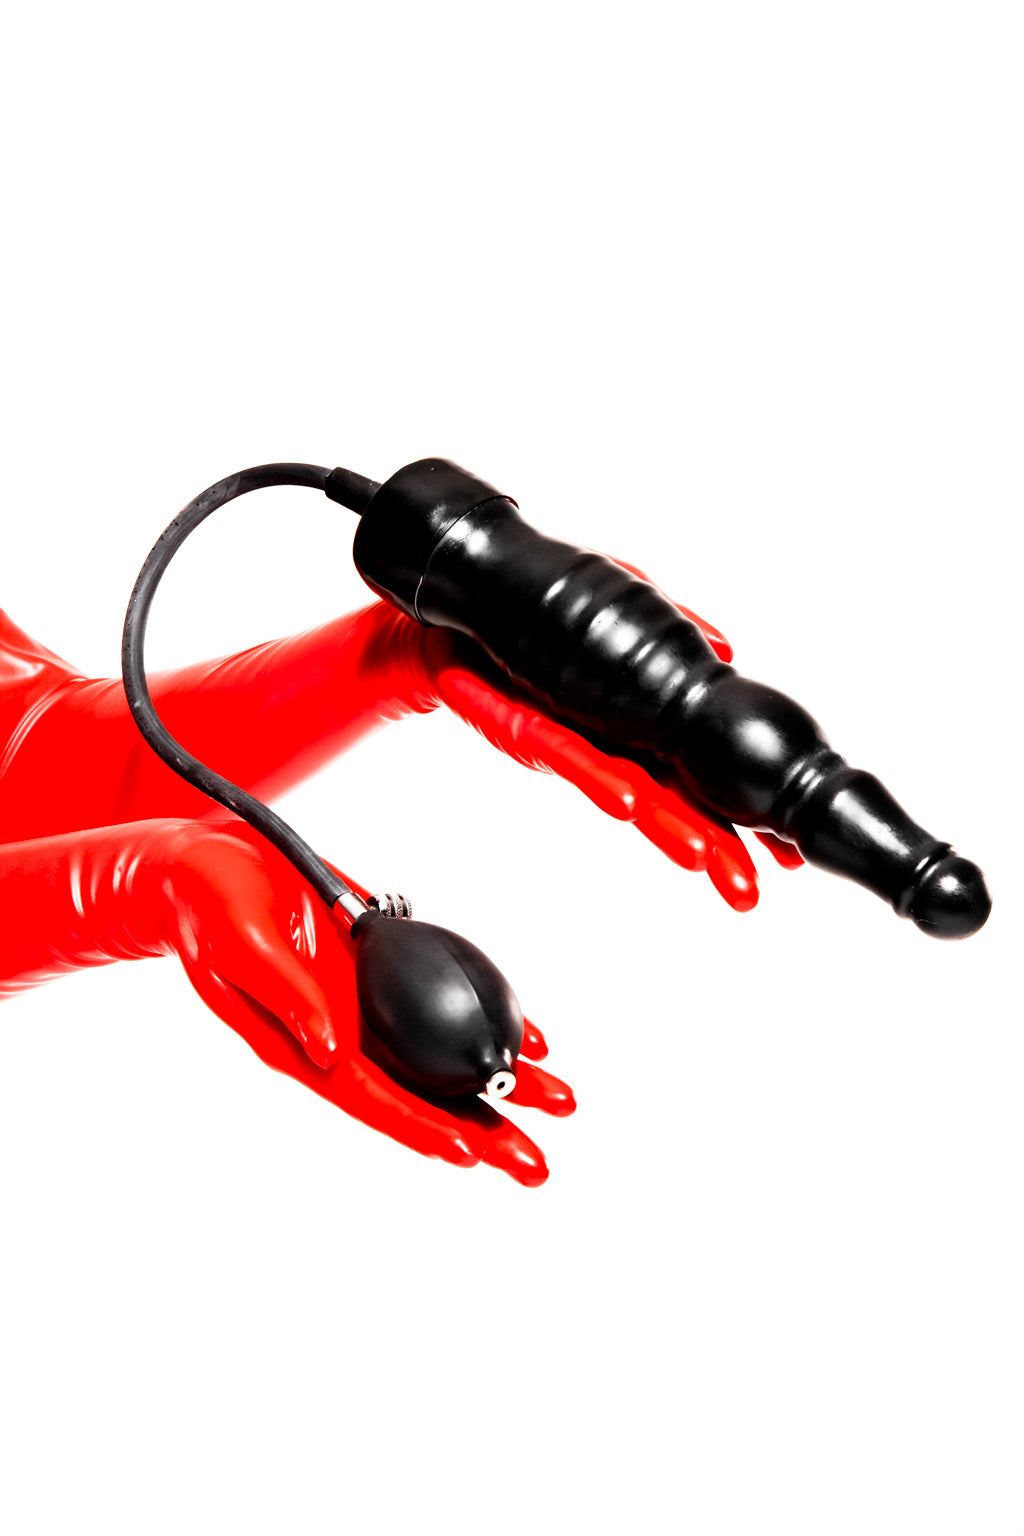 Red latex gloves holding a large inflatable ribbed dildo.